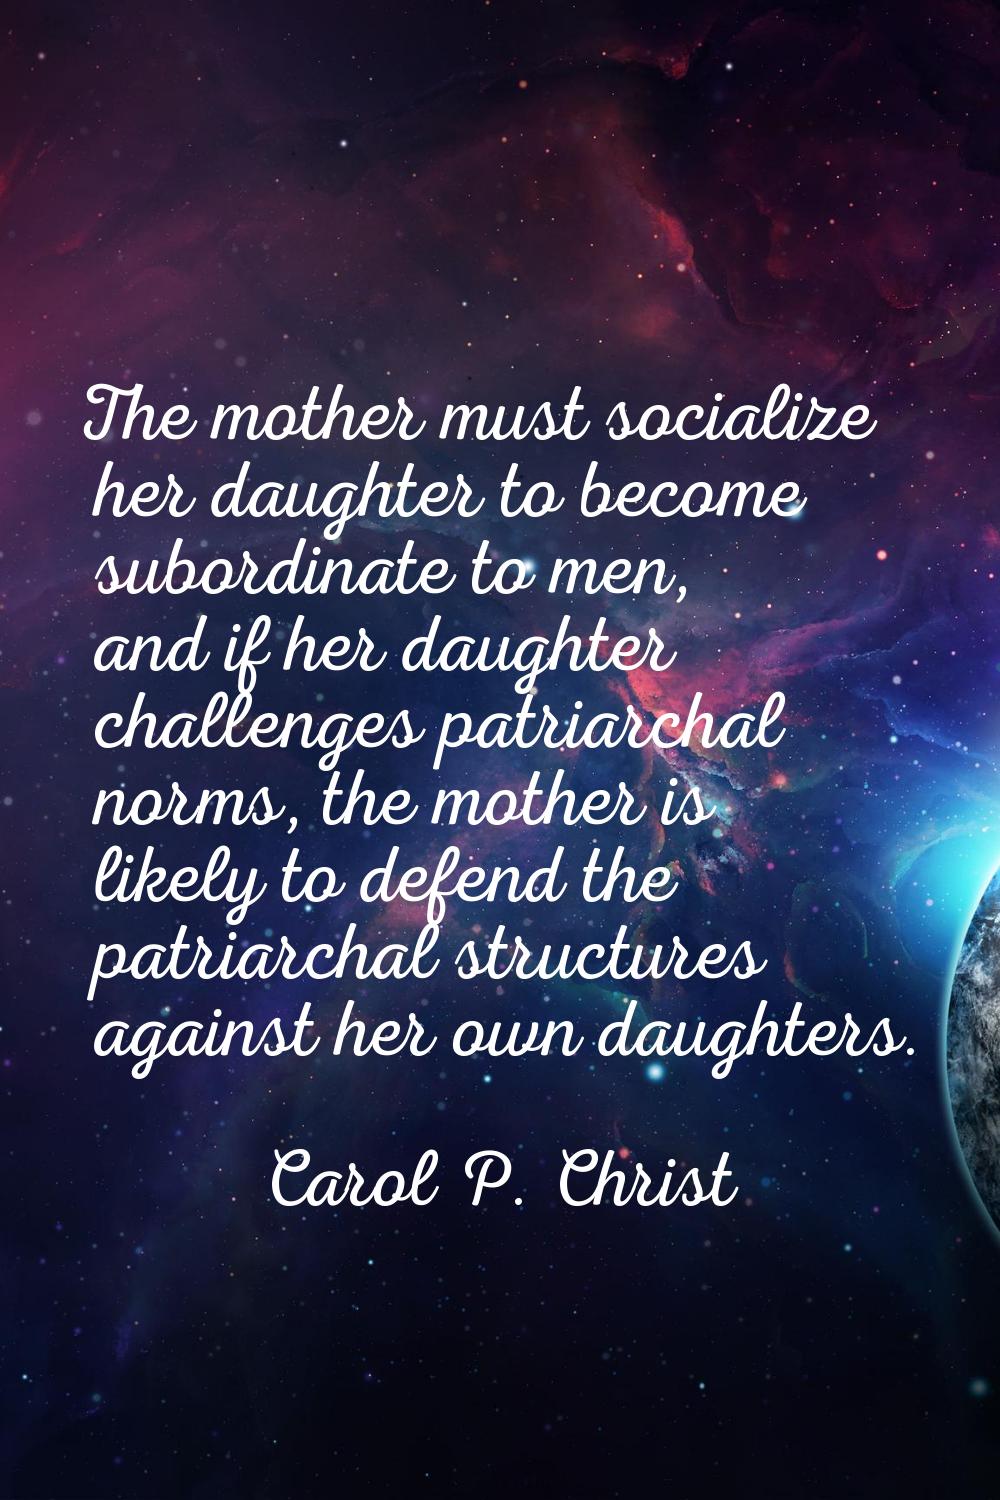 The mother must socialize her daughter to become subordinate to men, and if her daughter challenges